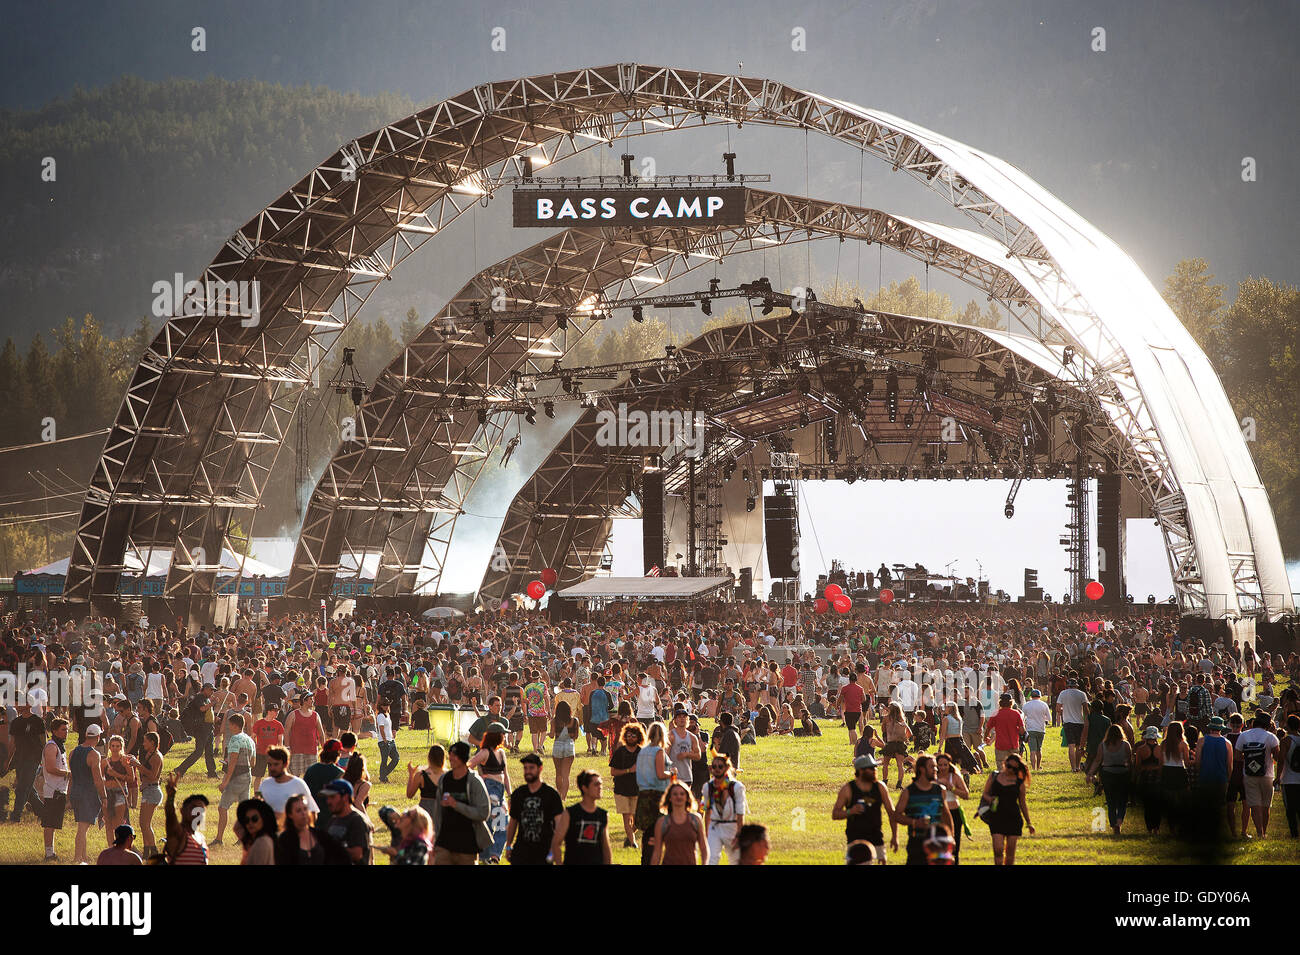 The Bass Camp stage at the Pemberton Music Festival.  EDM electronic dance music DJ.  Pemberton BC, Canada Stock Photo